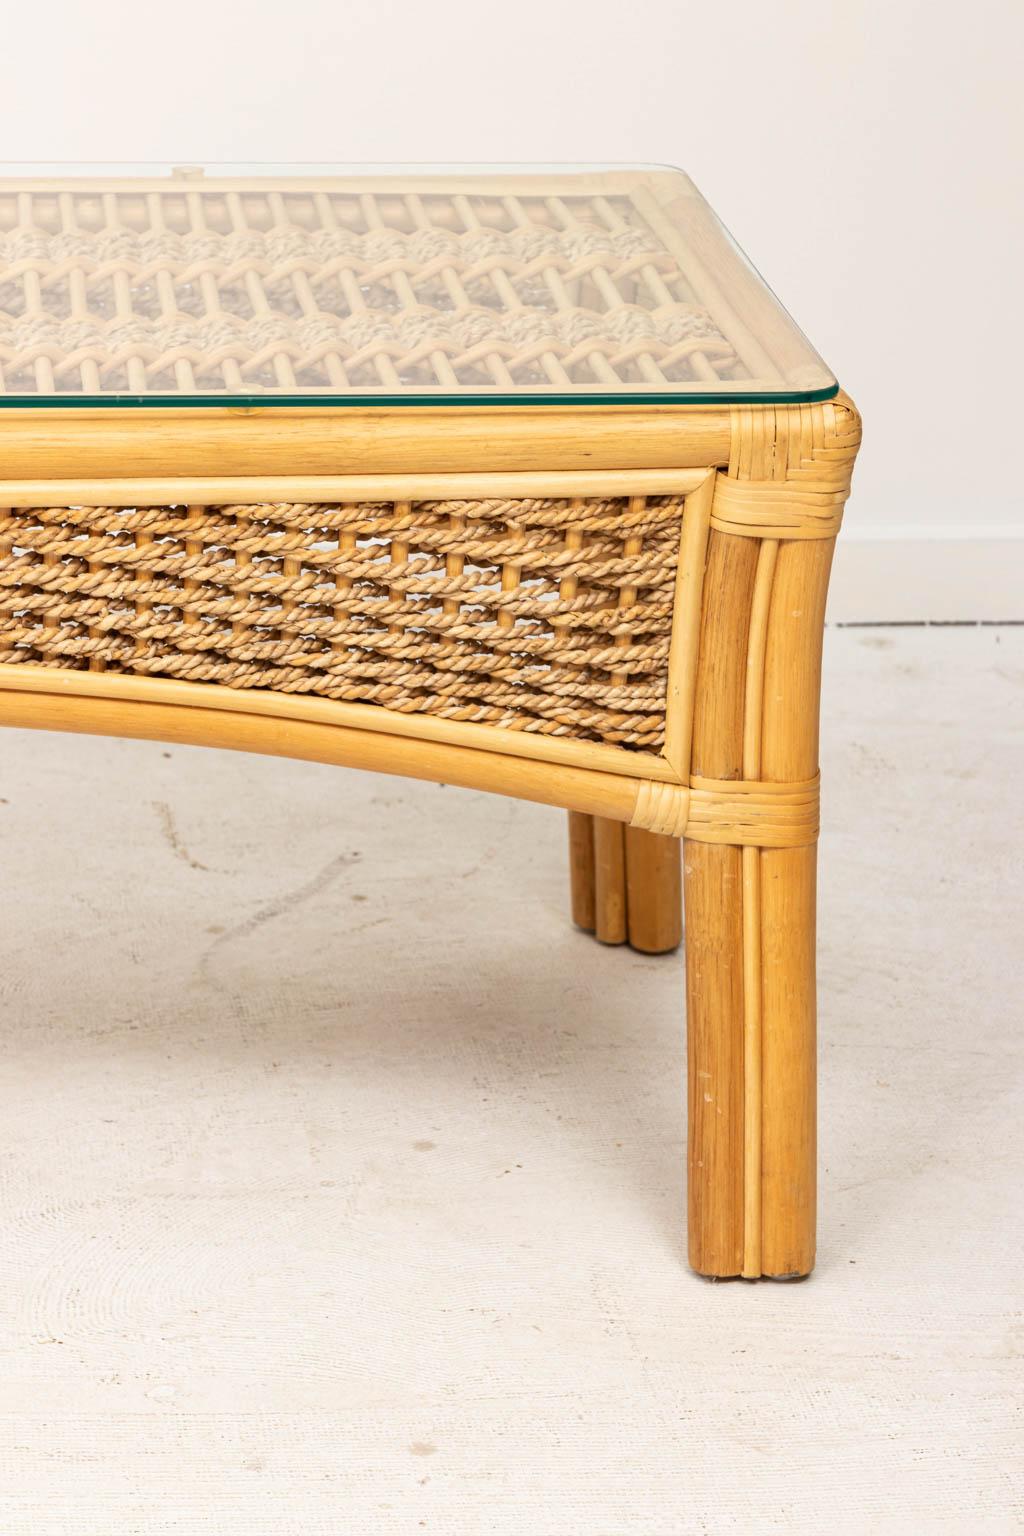 Bamboo and rope coffee table with glass top. Great for the beach house.